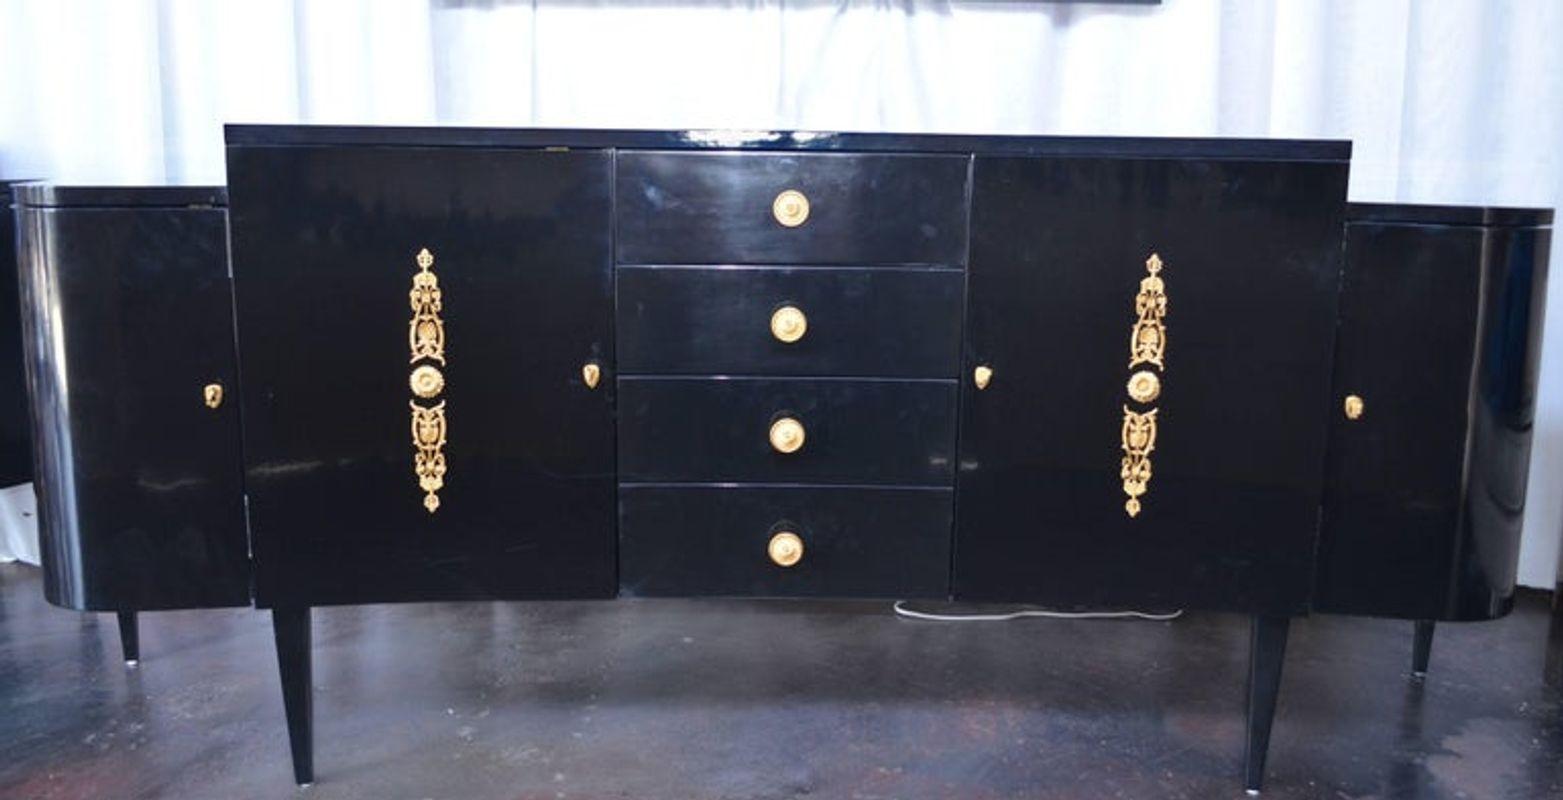 Pair of black lacquer commodes. The commodes have four front drawers with detailed gold finished bronze knobs. As well as four shelved cabinets with gold accents.